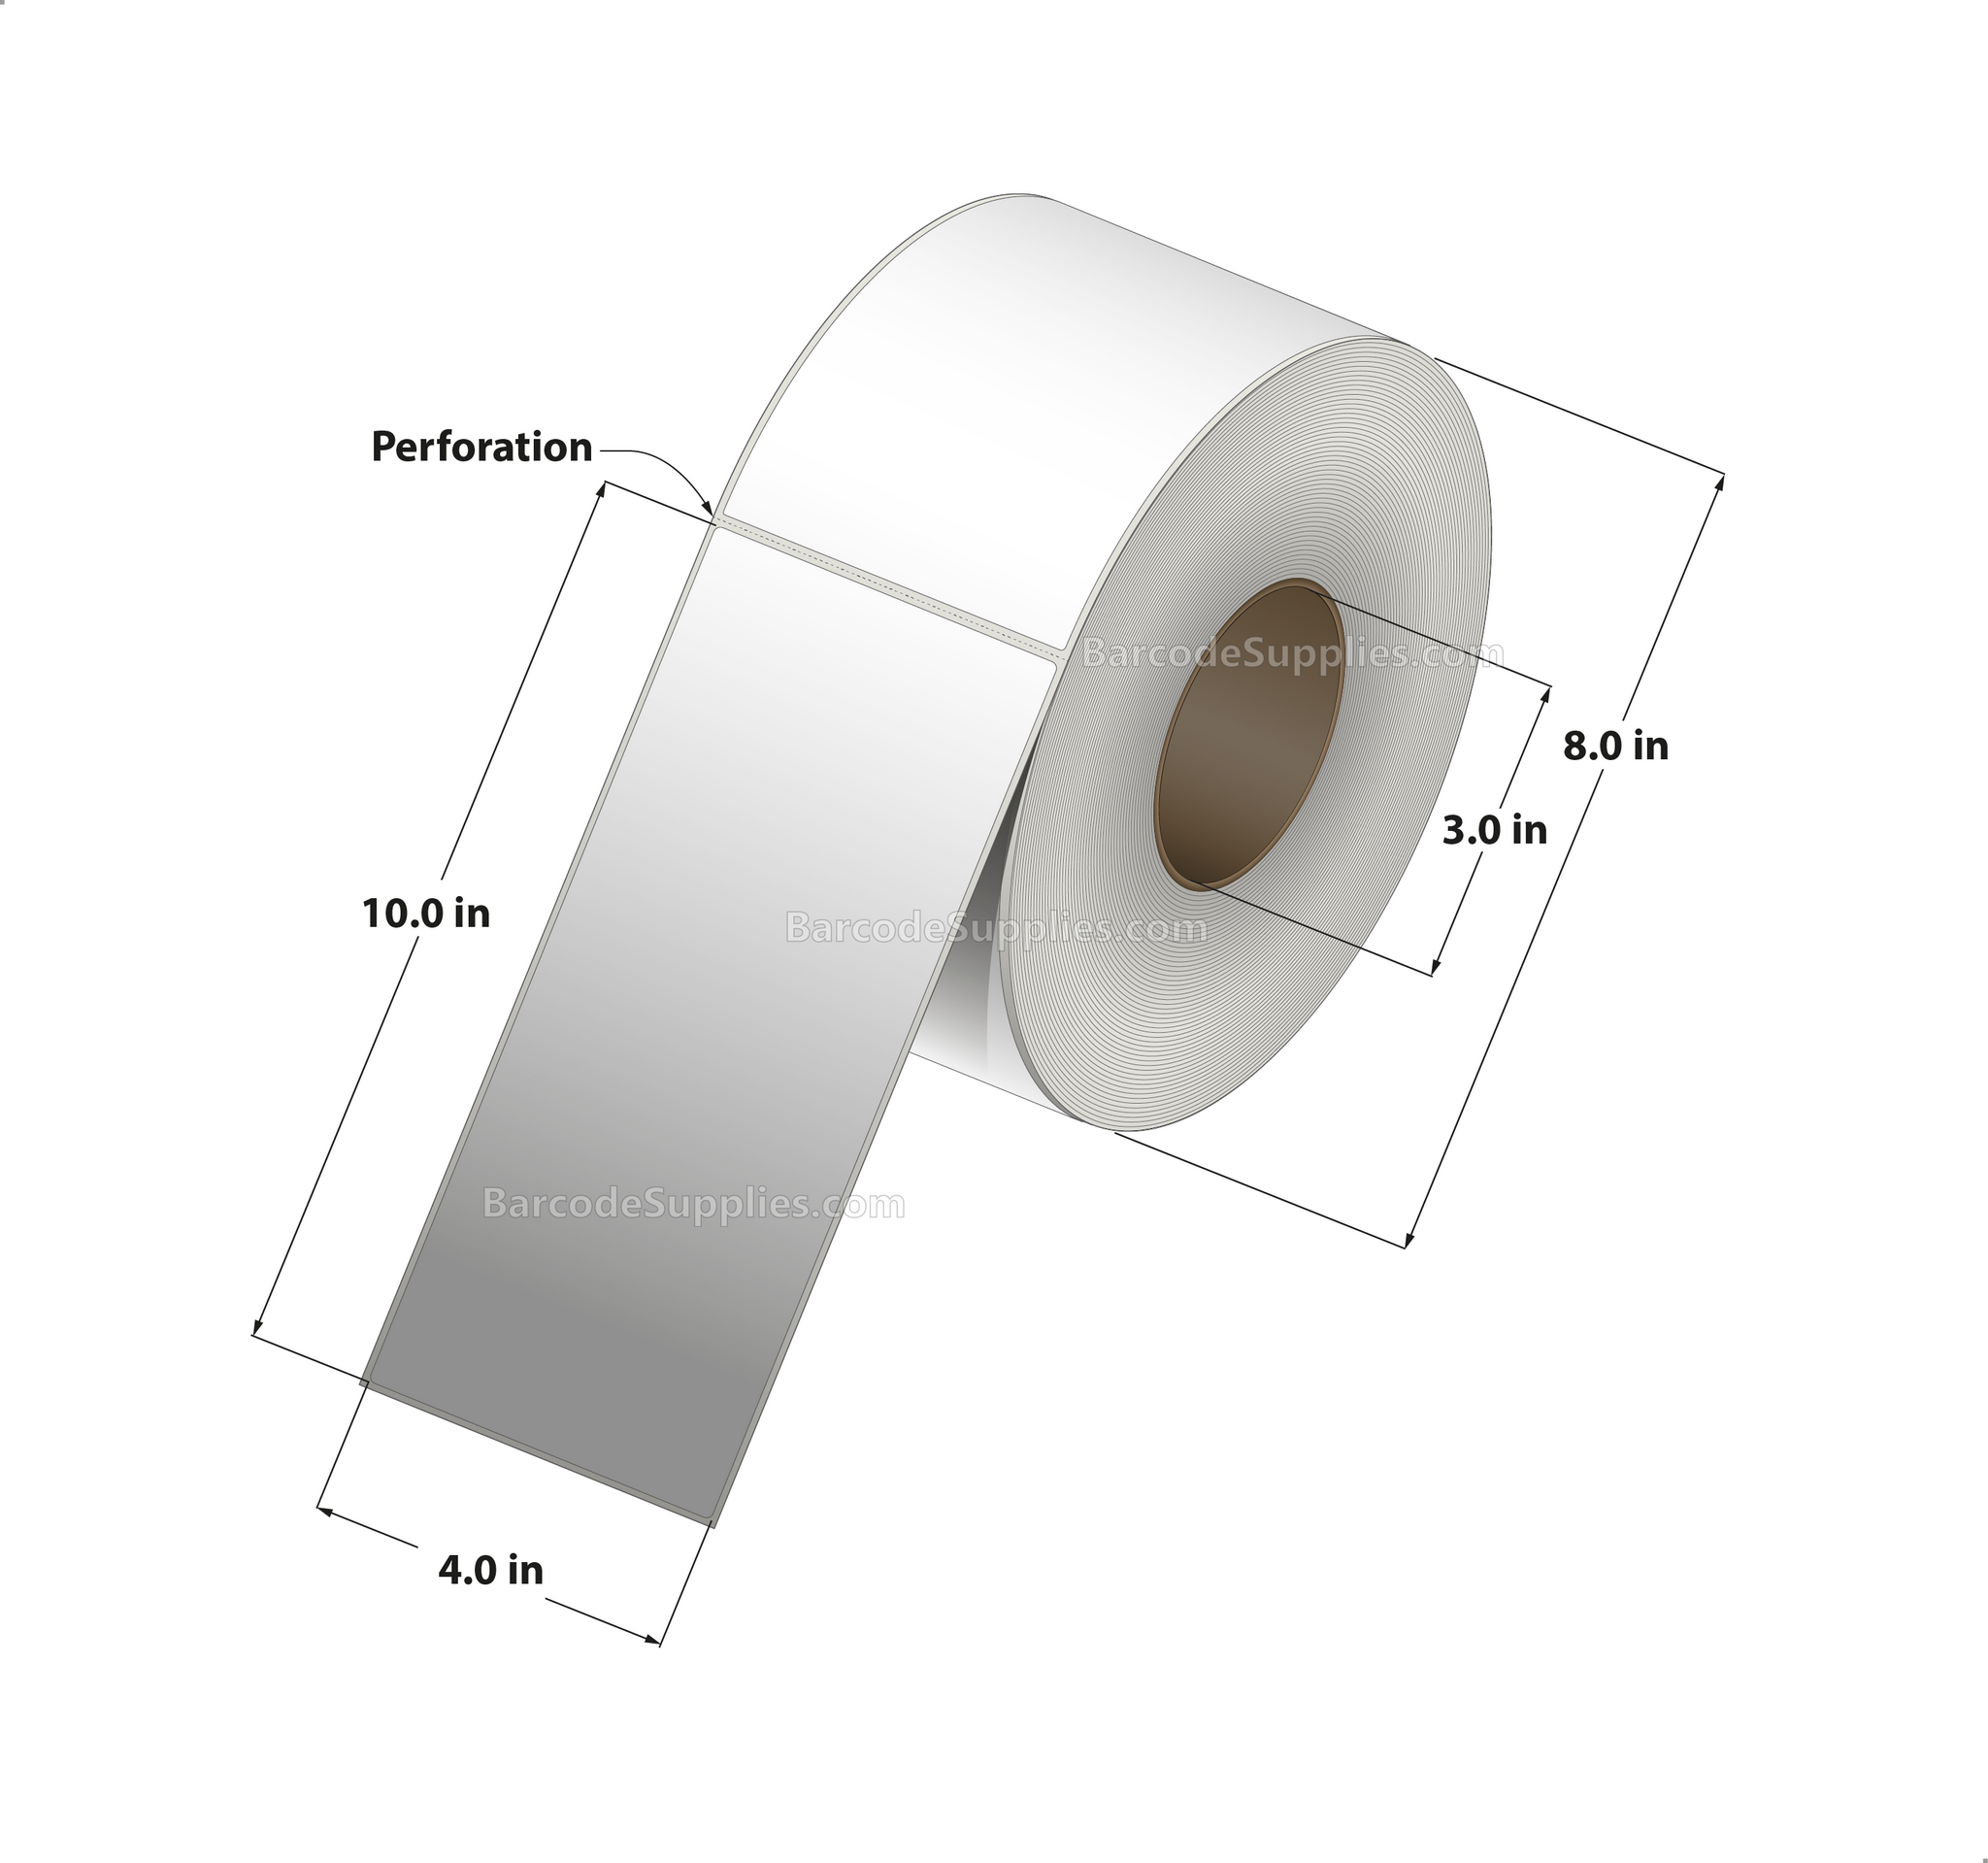 4 x 10 Thermal Transfer White Labels With Rubber Adhesive - Perforated - 600 Labels Per Roll - Carton Of 4 Rolls - 2400 Labels Total - MPN: CTT4001000-3P